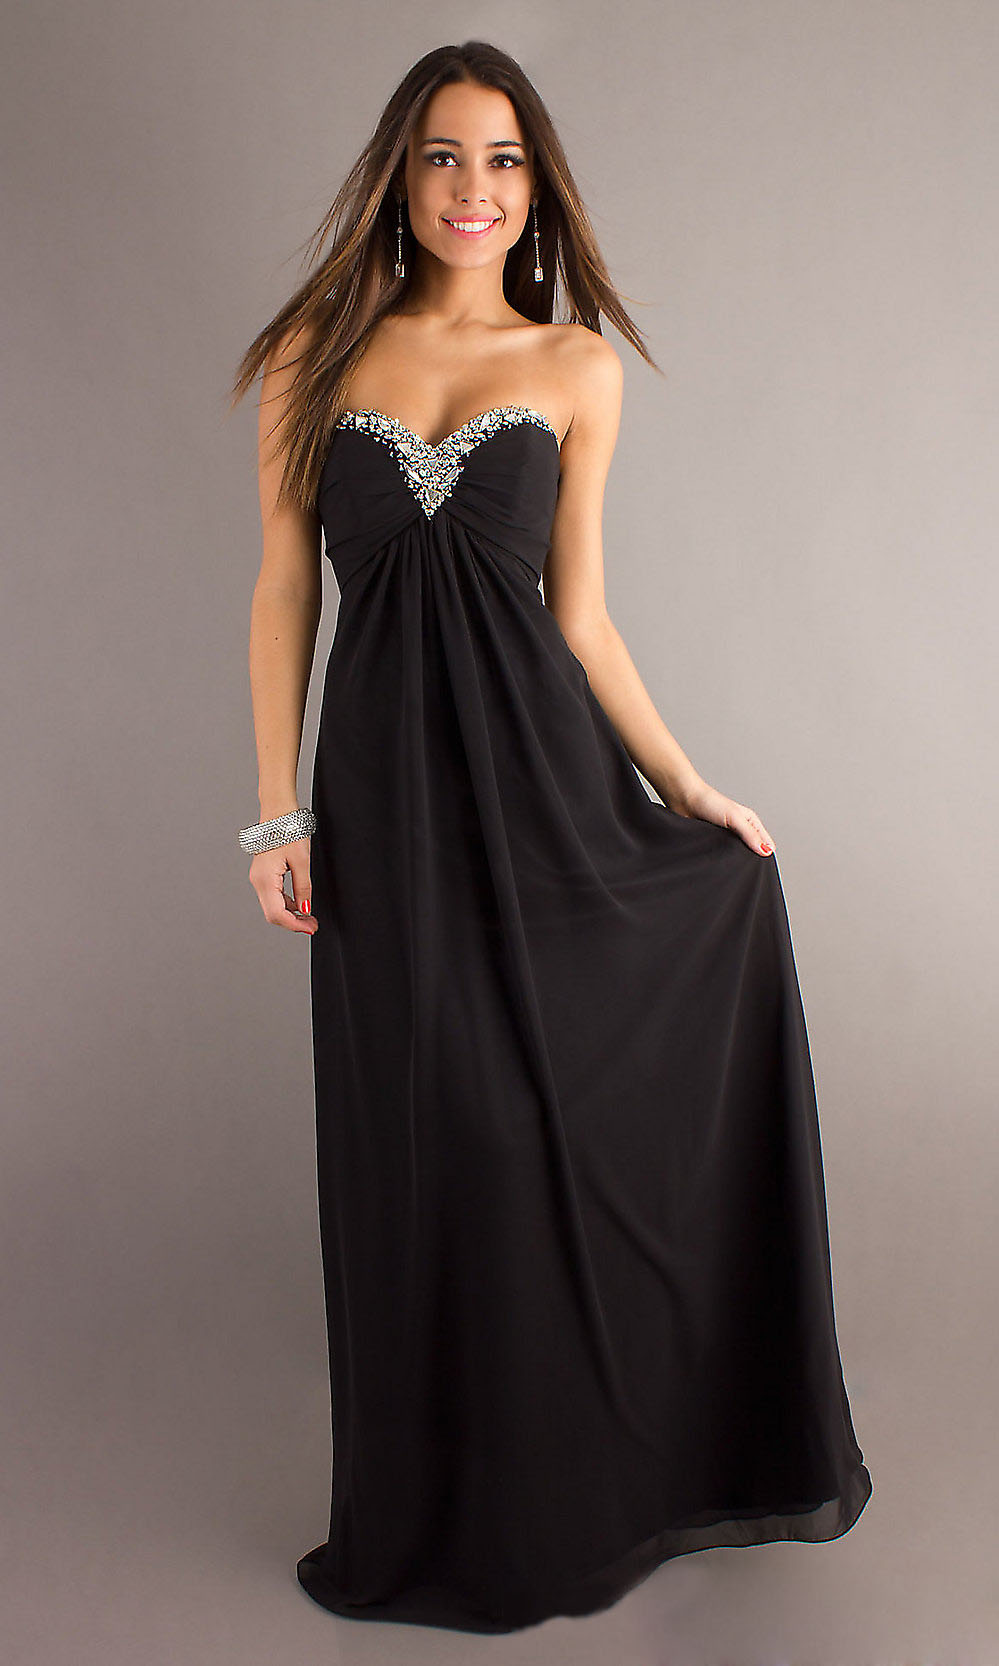 Sparkly Beaded Top Strapless Black Long Evening Dress